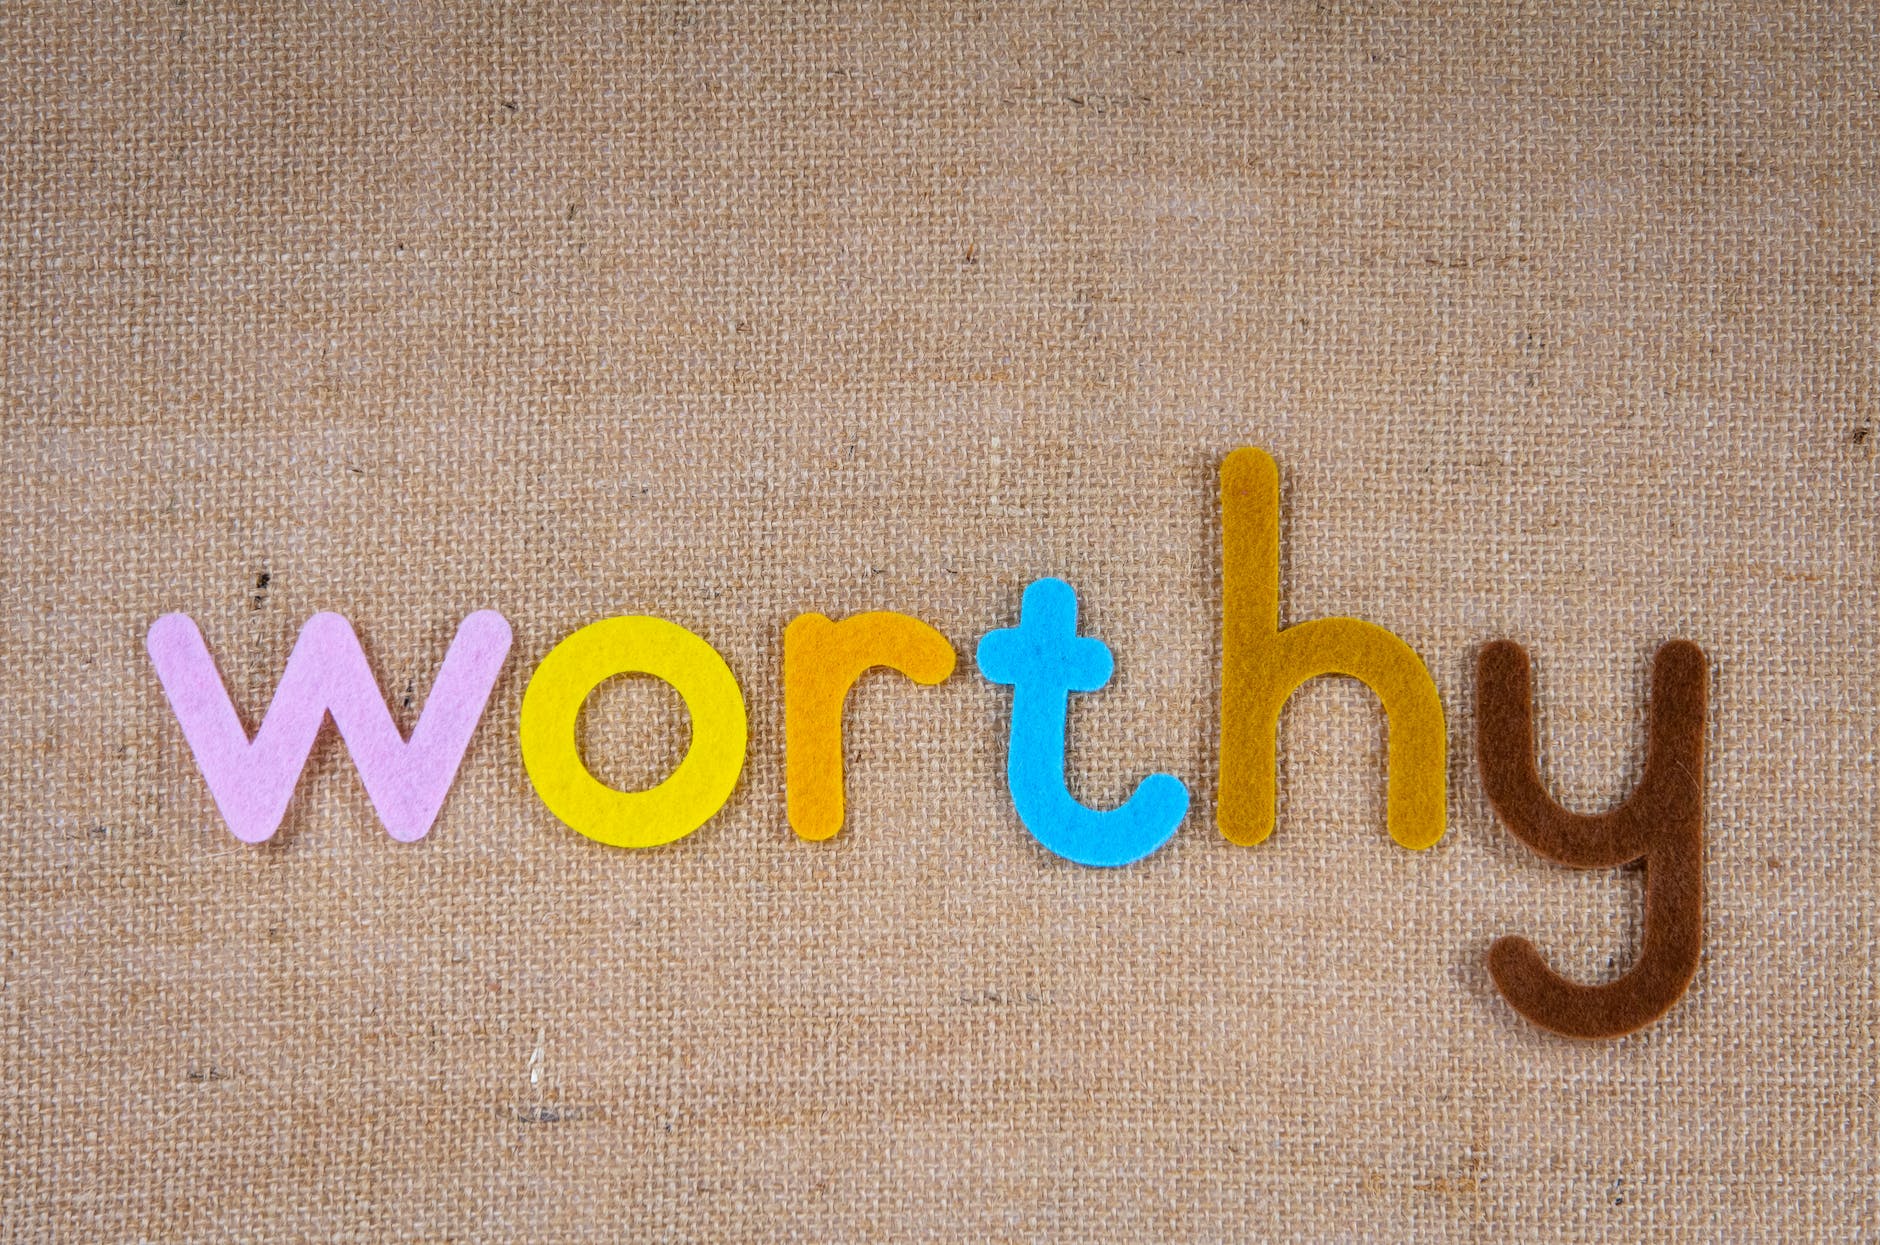 the word worthy on a woven surface